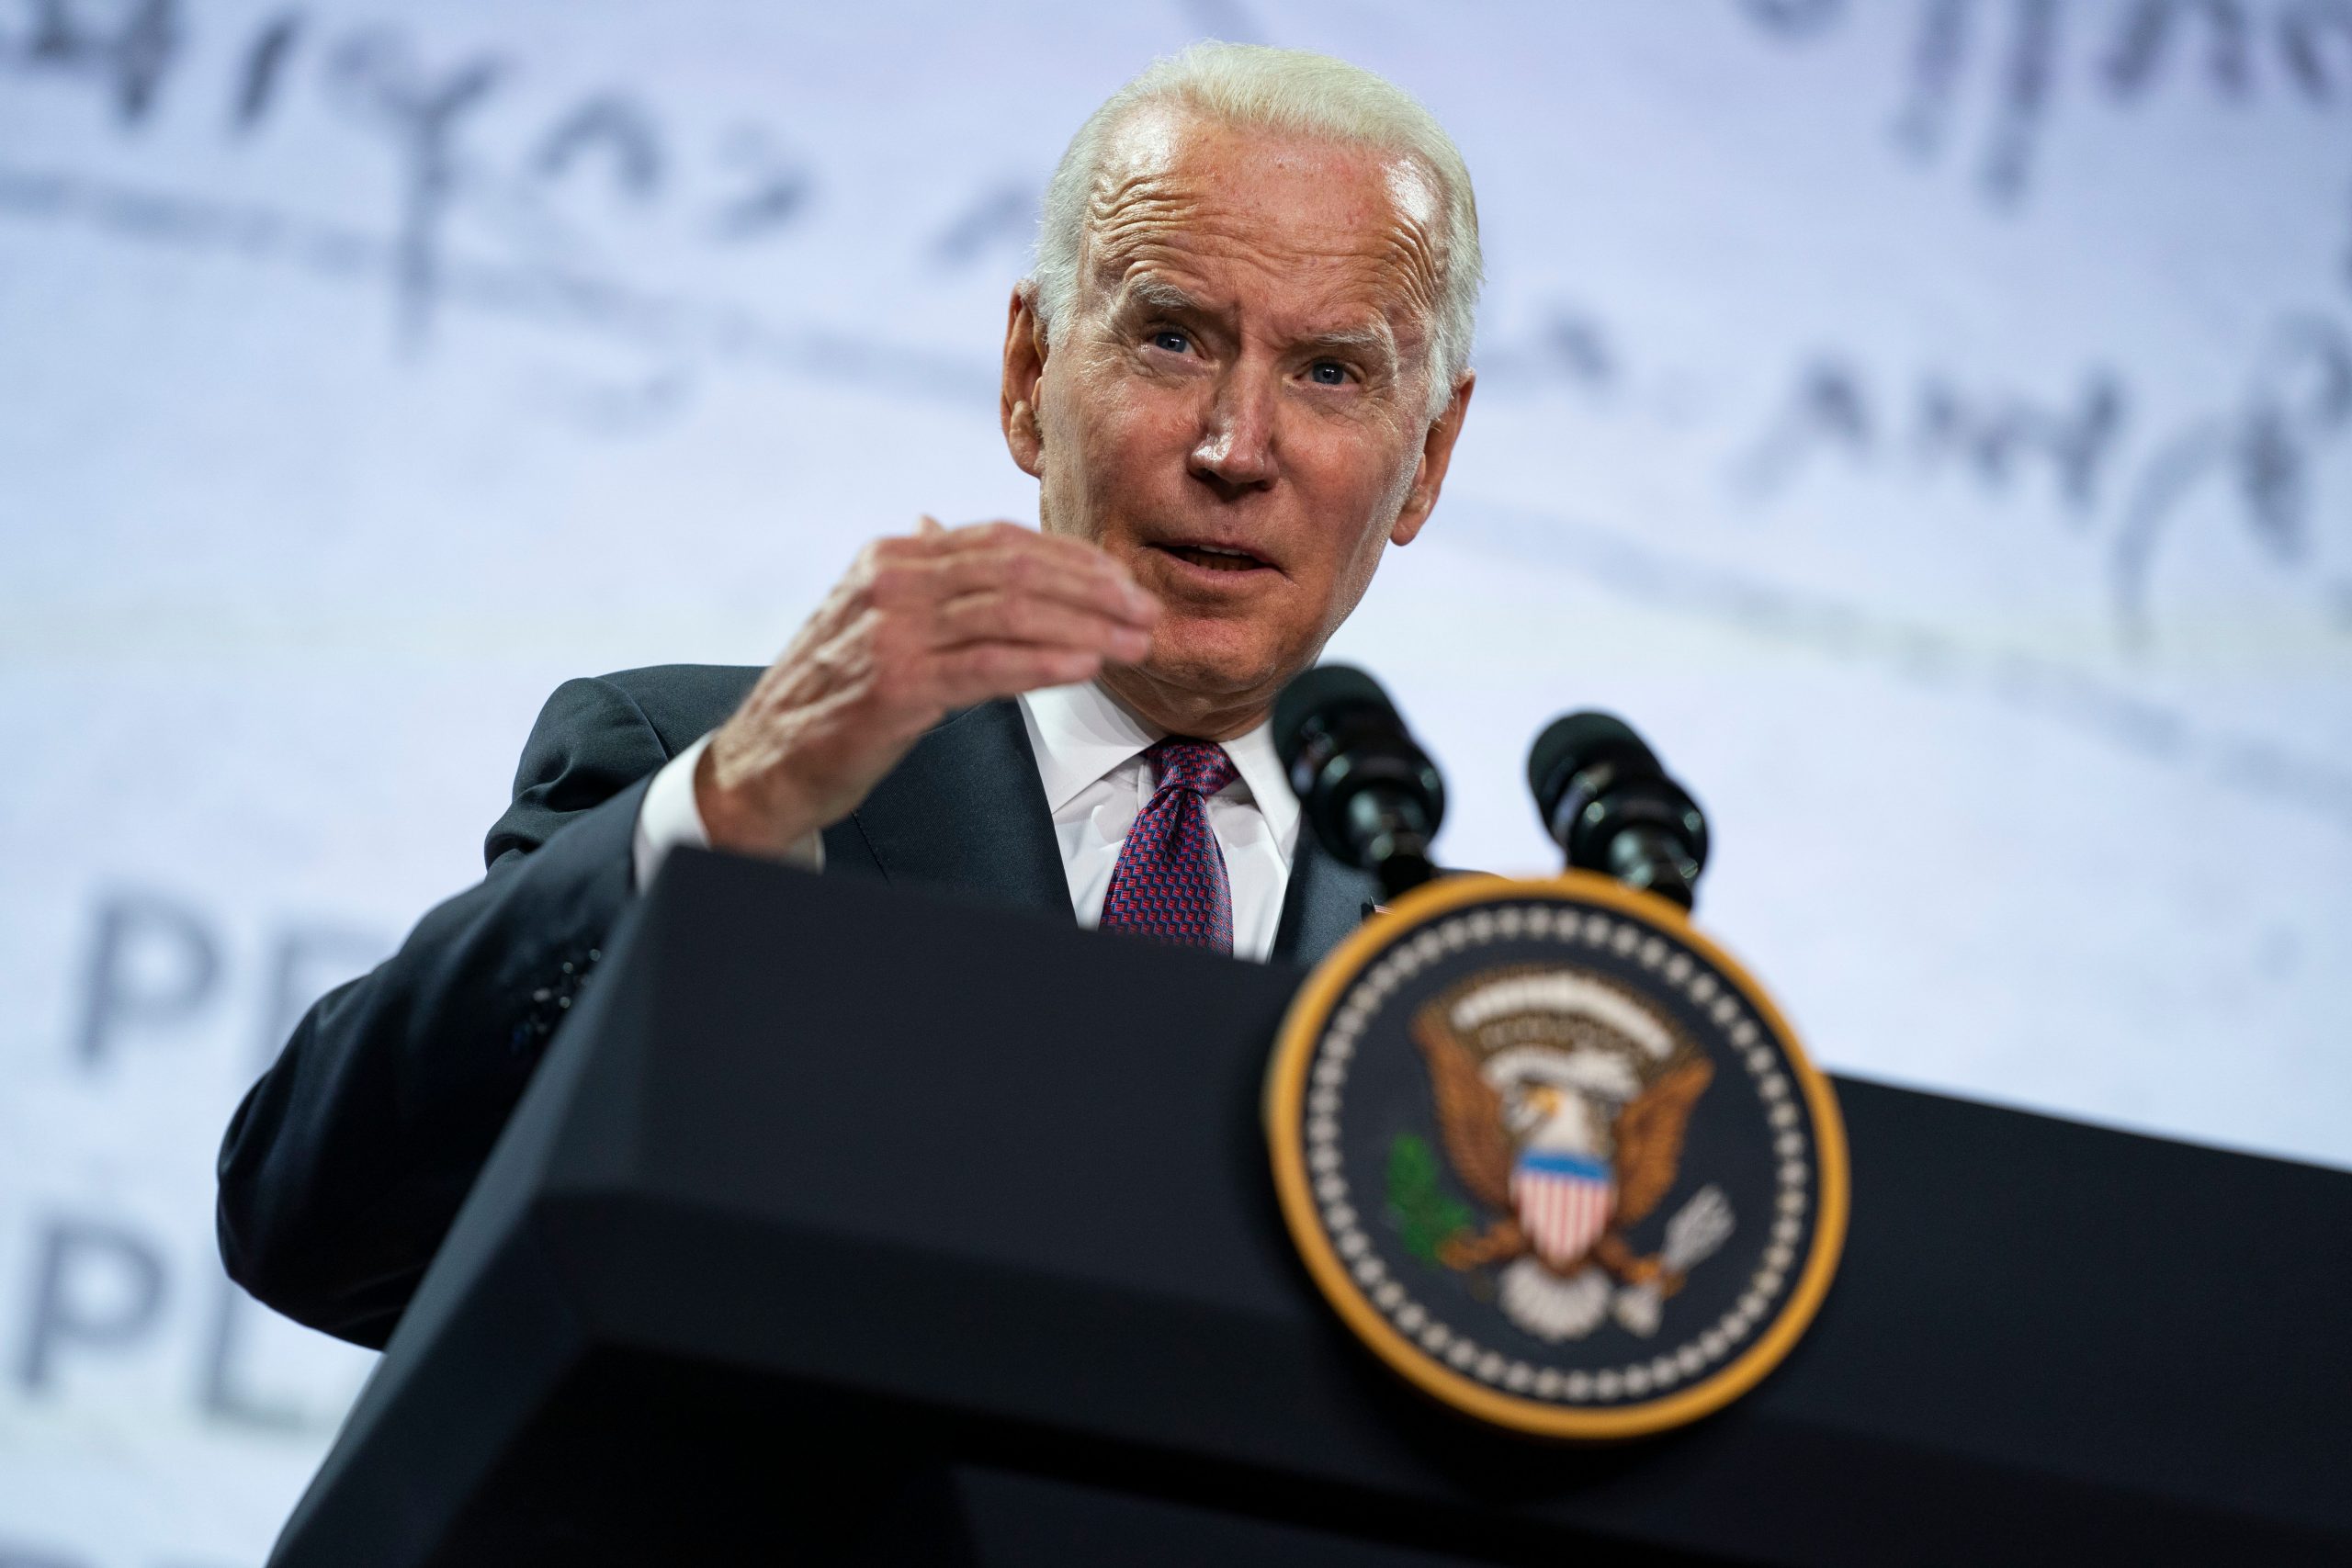 COP 26: Biden apologises for US pulling out of Paris Climate Accords under Donald Trump